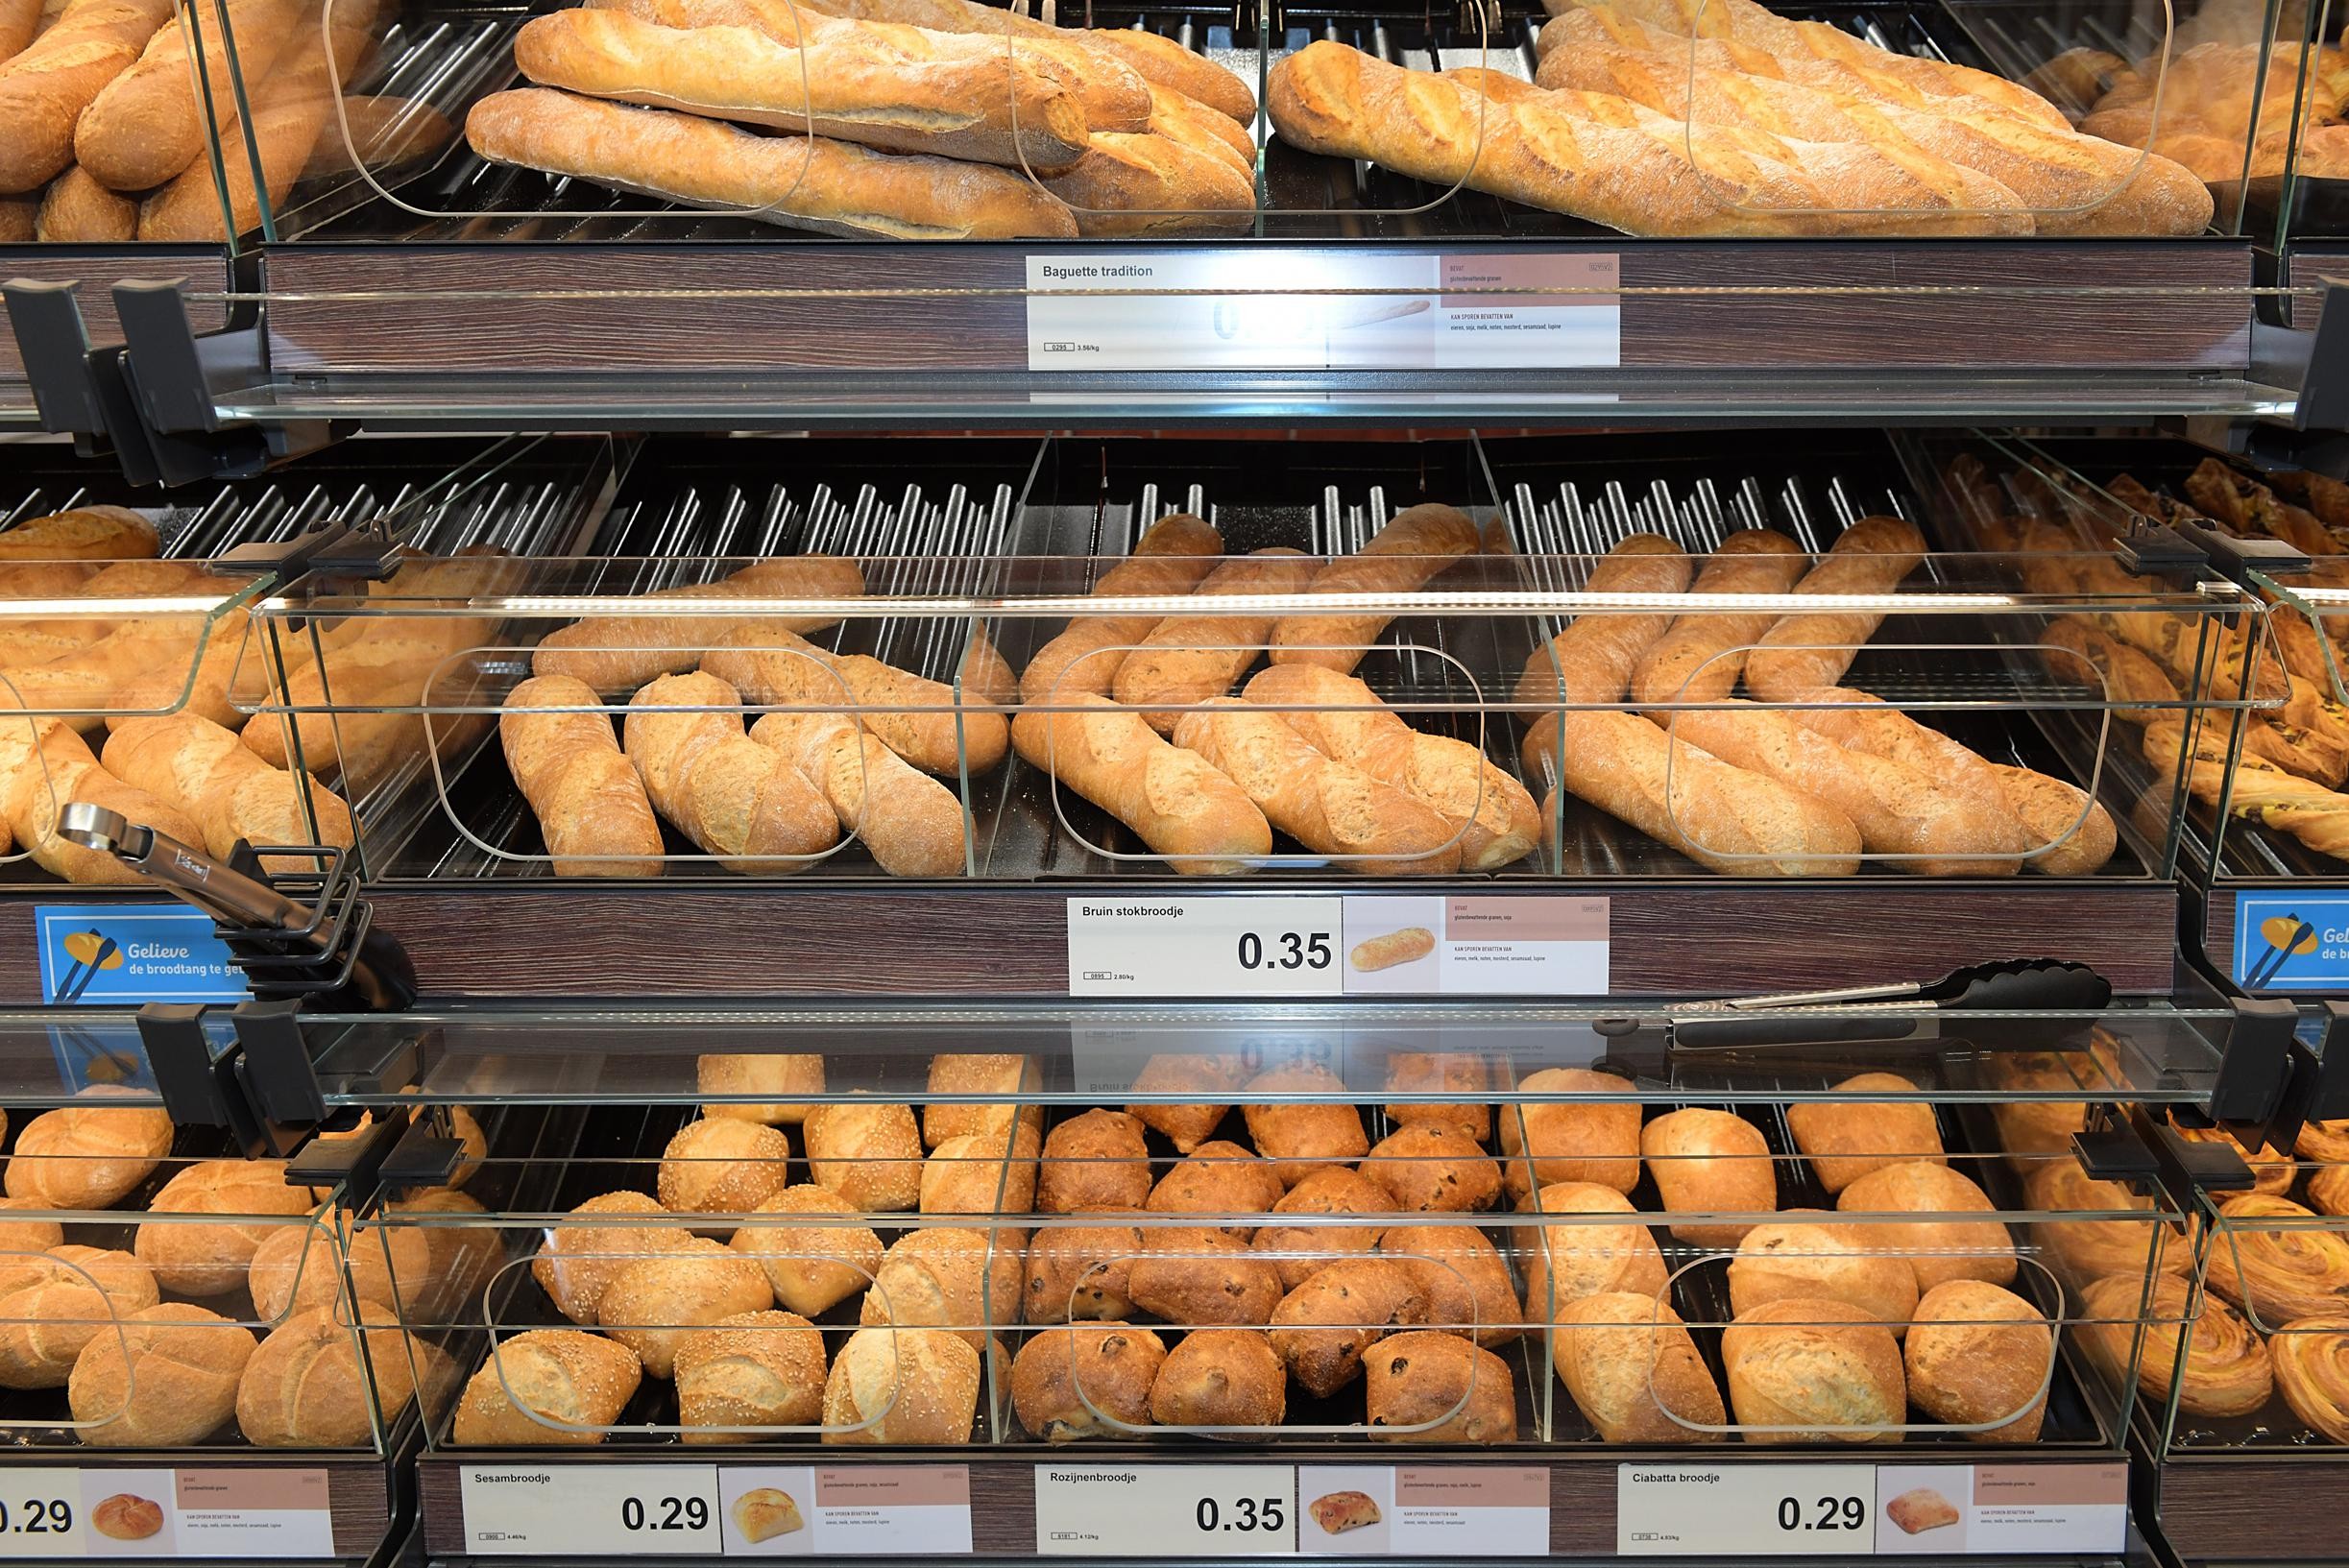 Bread will also be more expensive at supermarkets: “There is going to be a price explosion.”